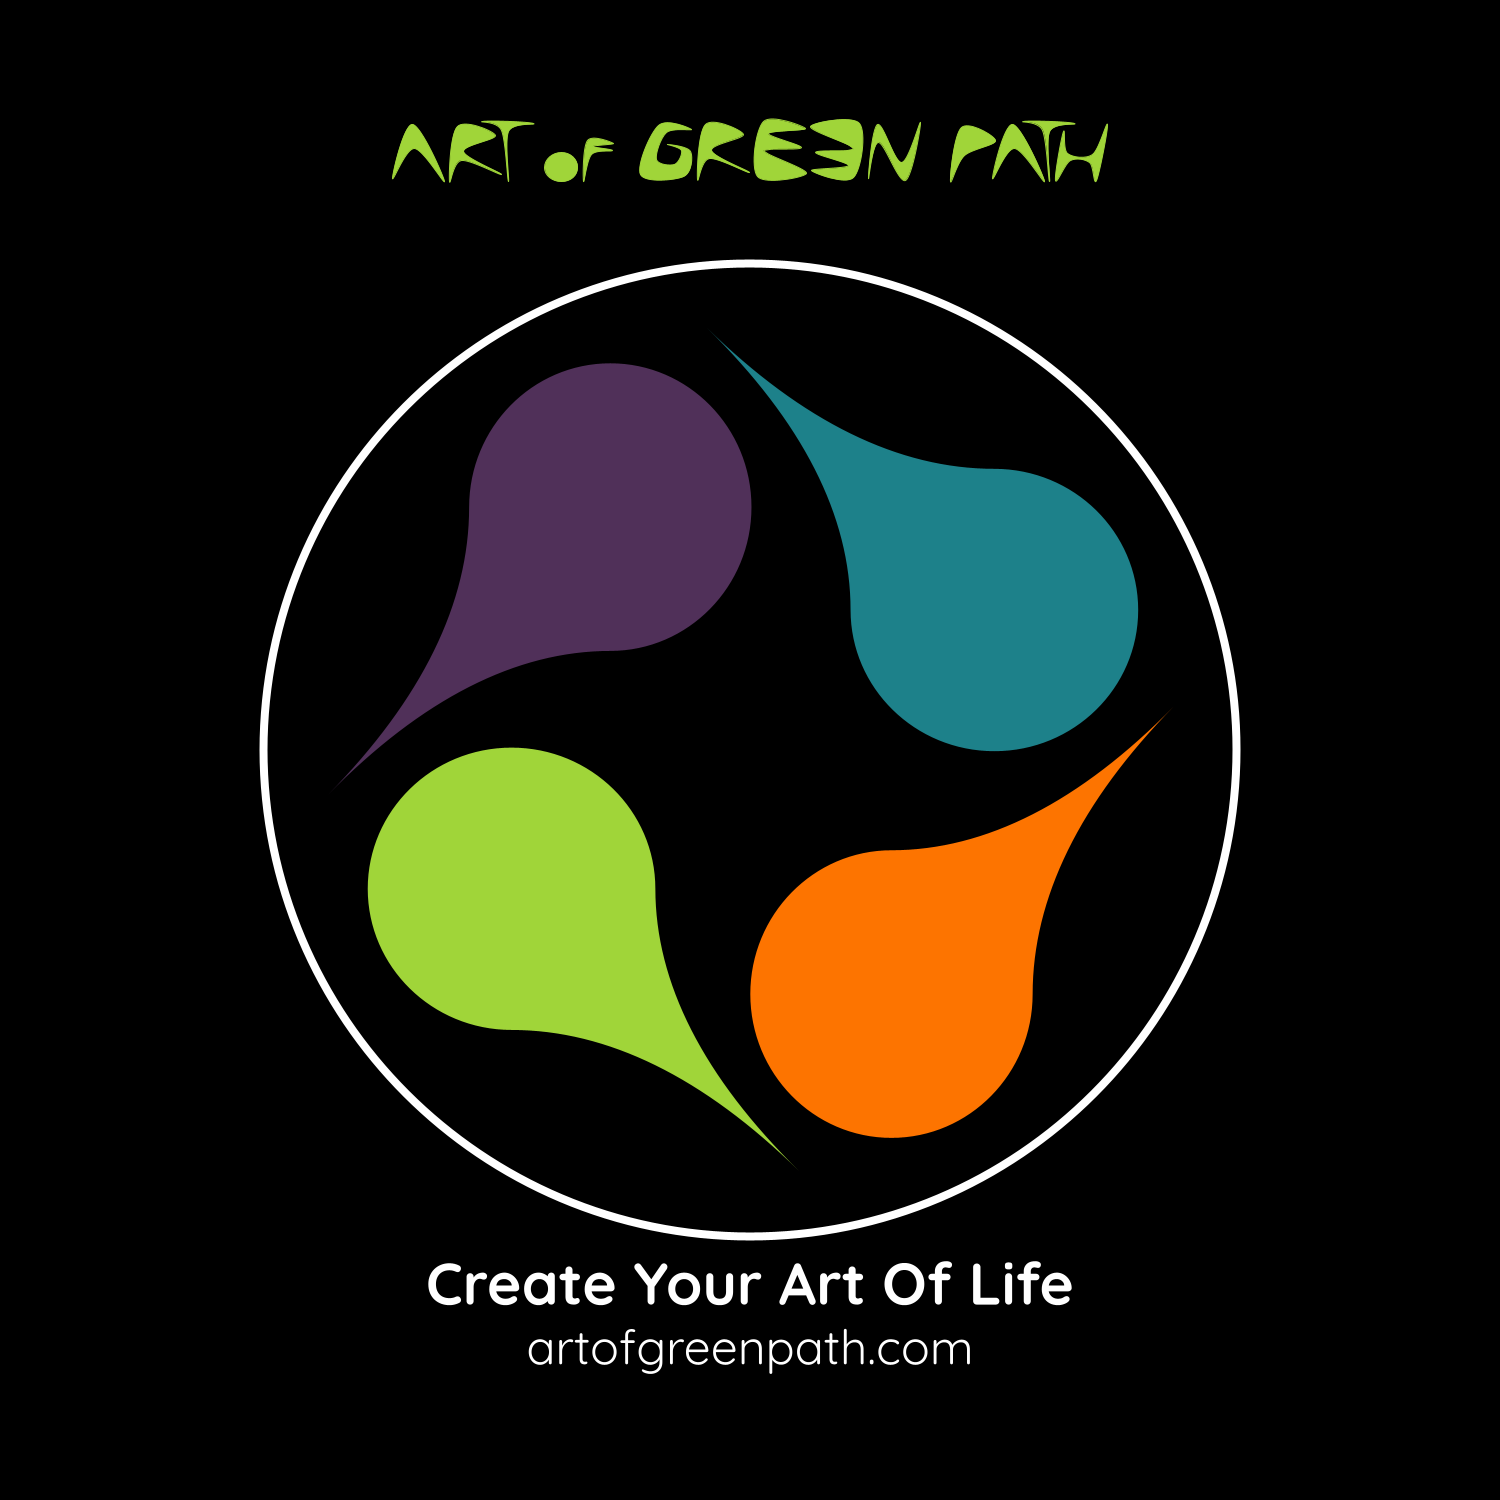 Art Of Green Path - Create Your Art Of Life